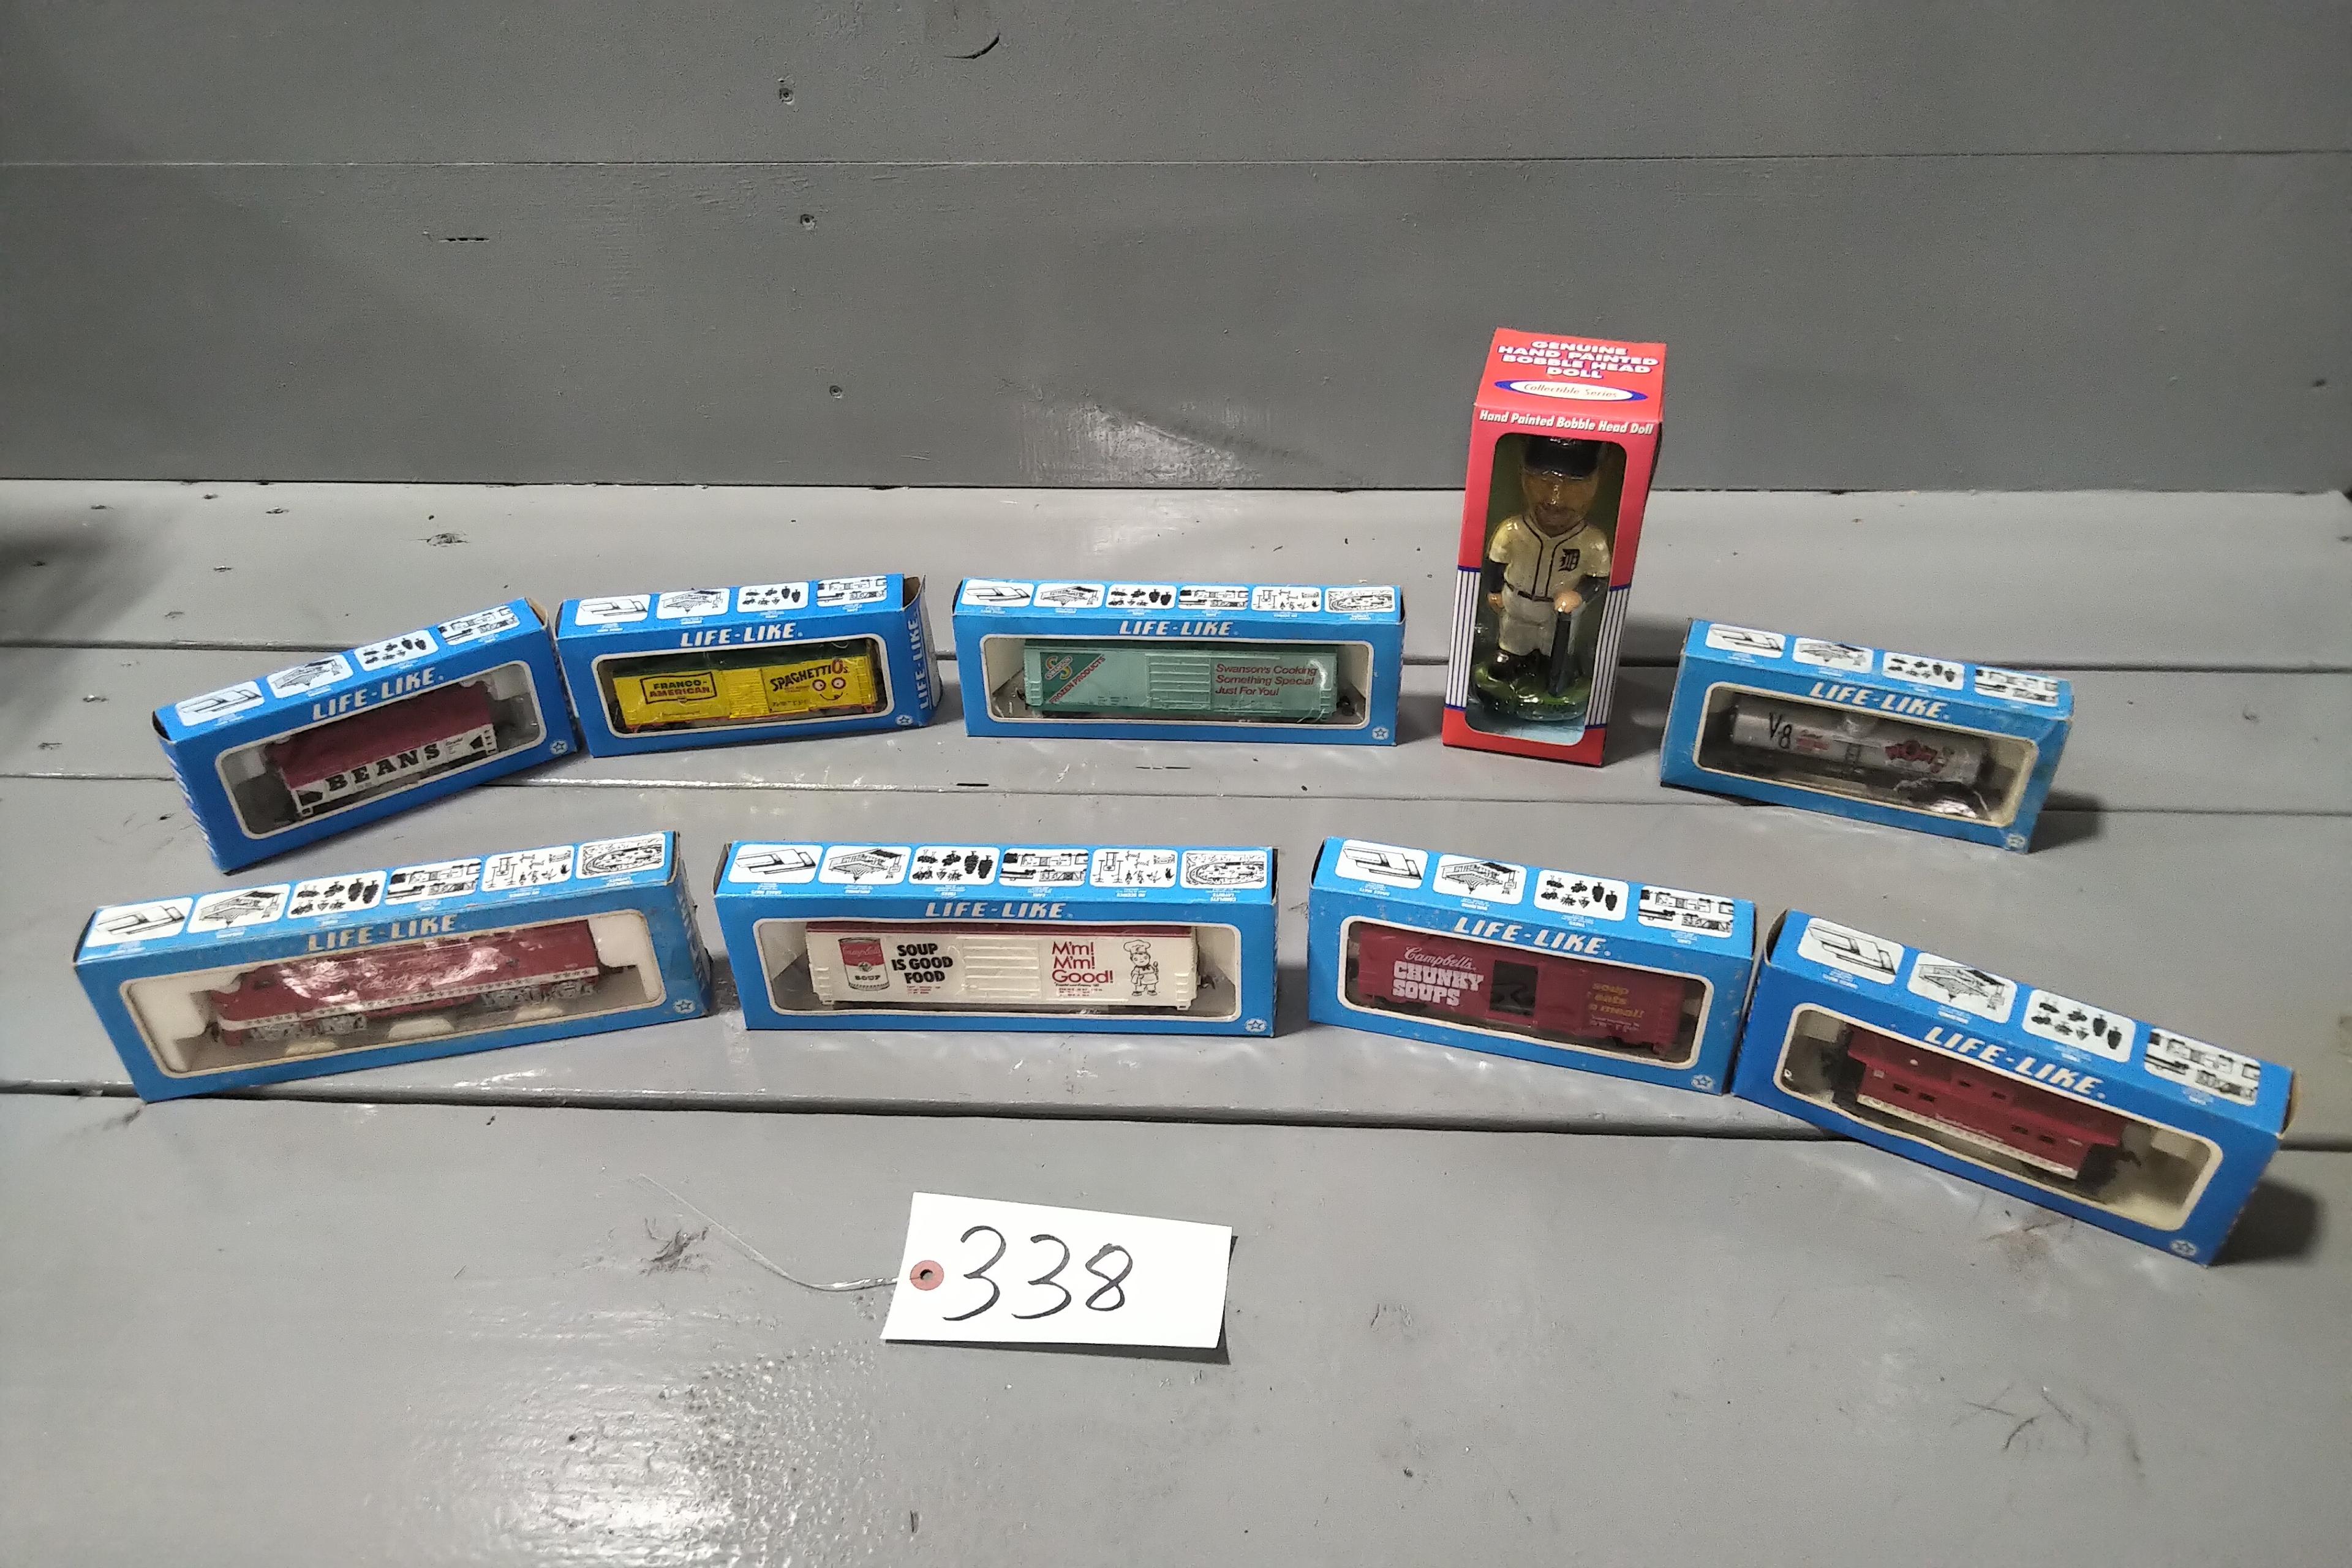 BOBLE HEAD OF BOBBY HIGGINSON, 8 - 1/64 SCALE RAIL CARS IN BOXES, 19 SIGNED BASEBALLS